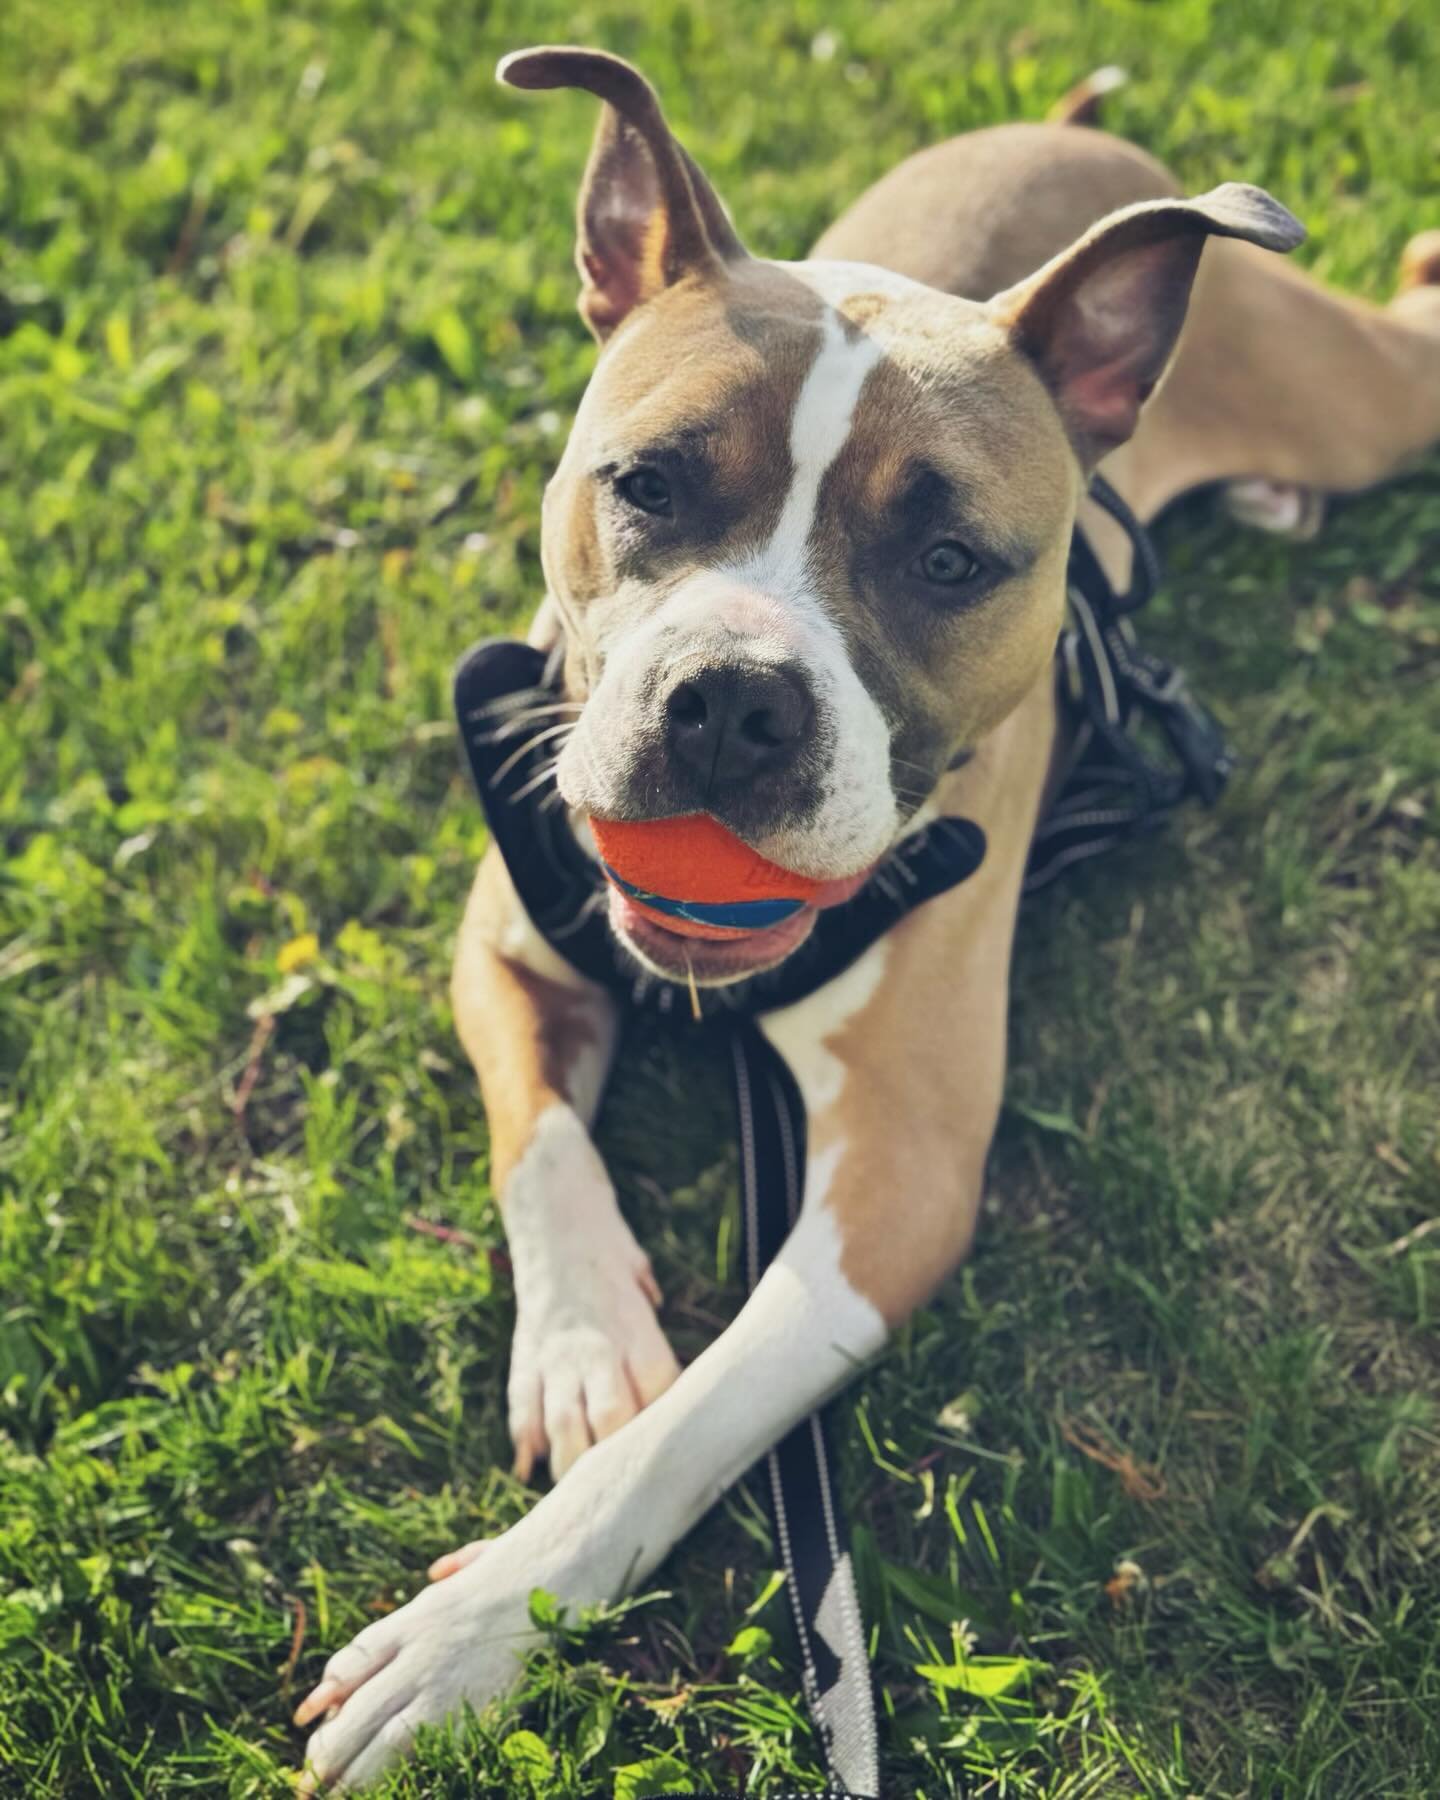 Mr. Winston has officially passed on his Chuck It ball obsession to the Winston&rsquo;s Wishes pups 🥹

This is handsome Toby&rsquo;s new favorite toy! 💙

#toby #tobysjourney #adopt #adoptdontshop #soontobeadoptable #sohandsome #newkidontheblock #ch